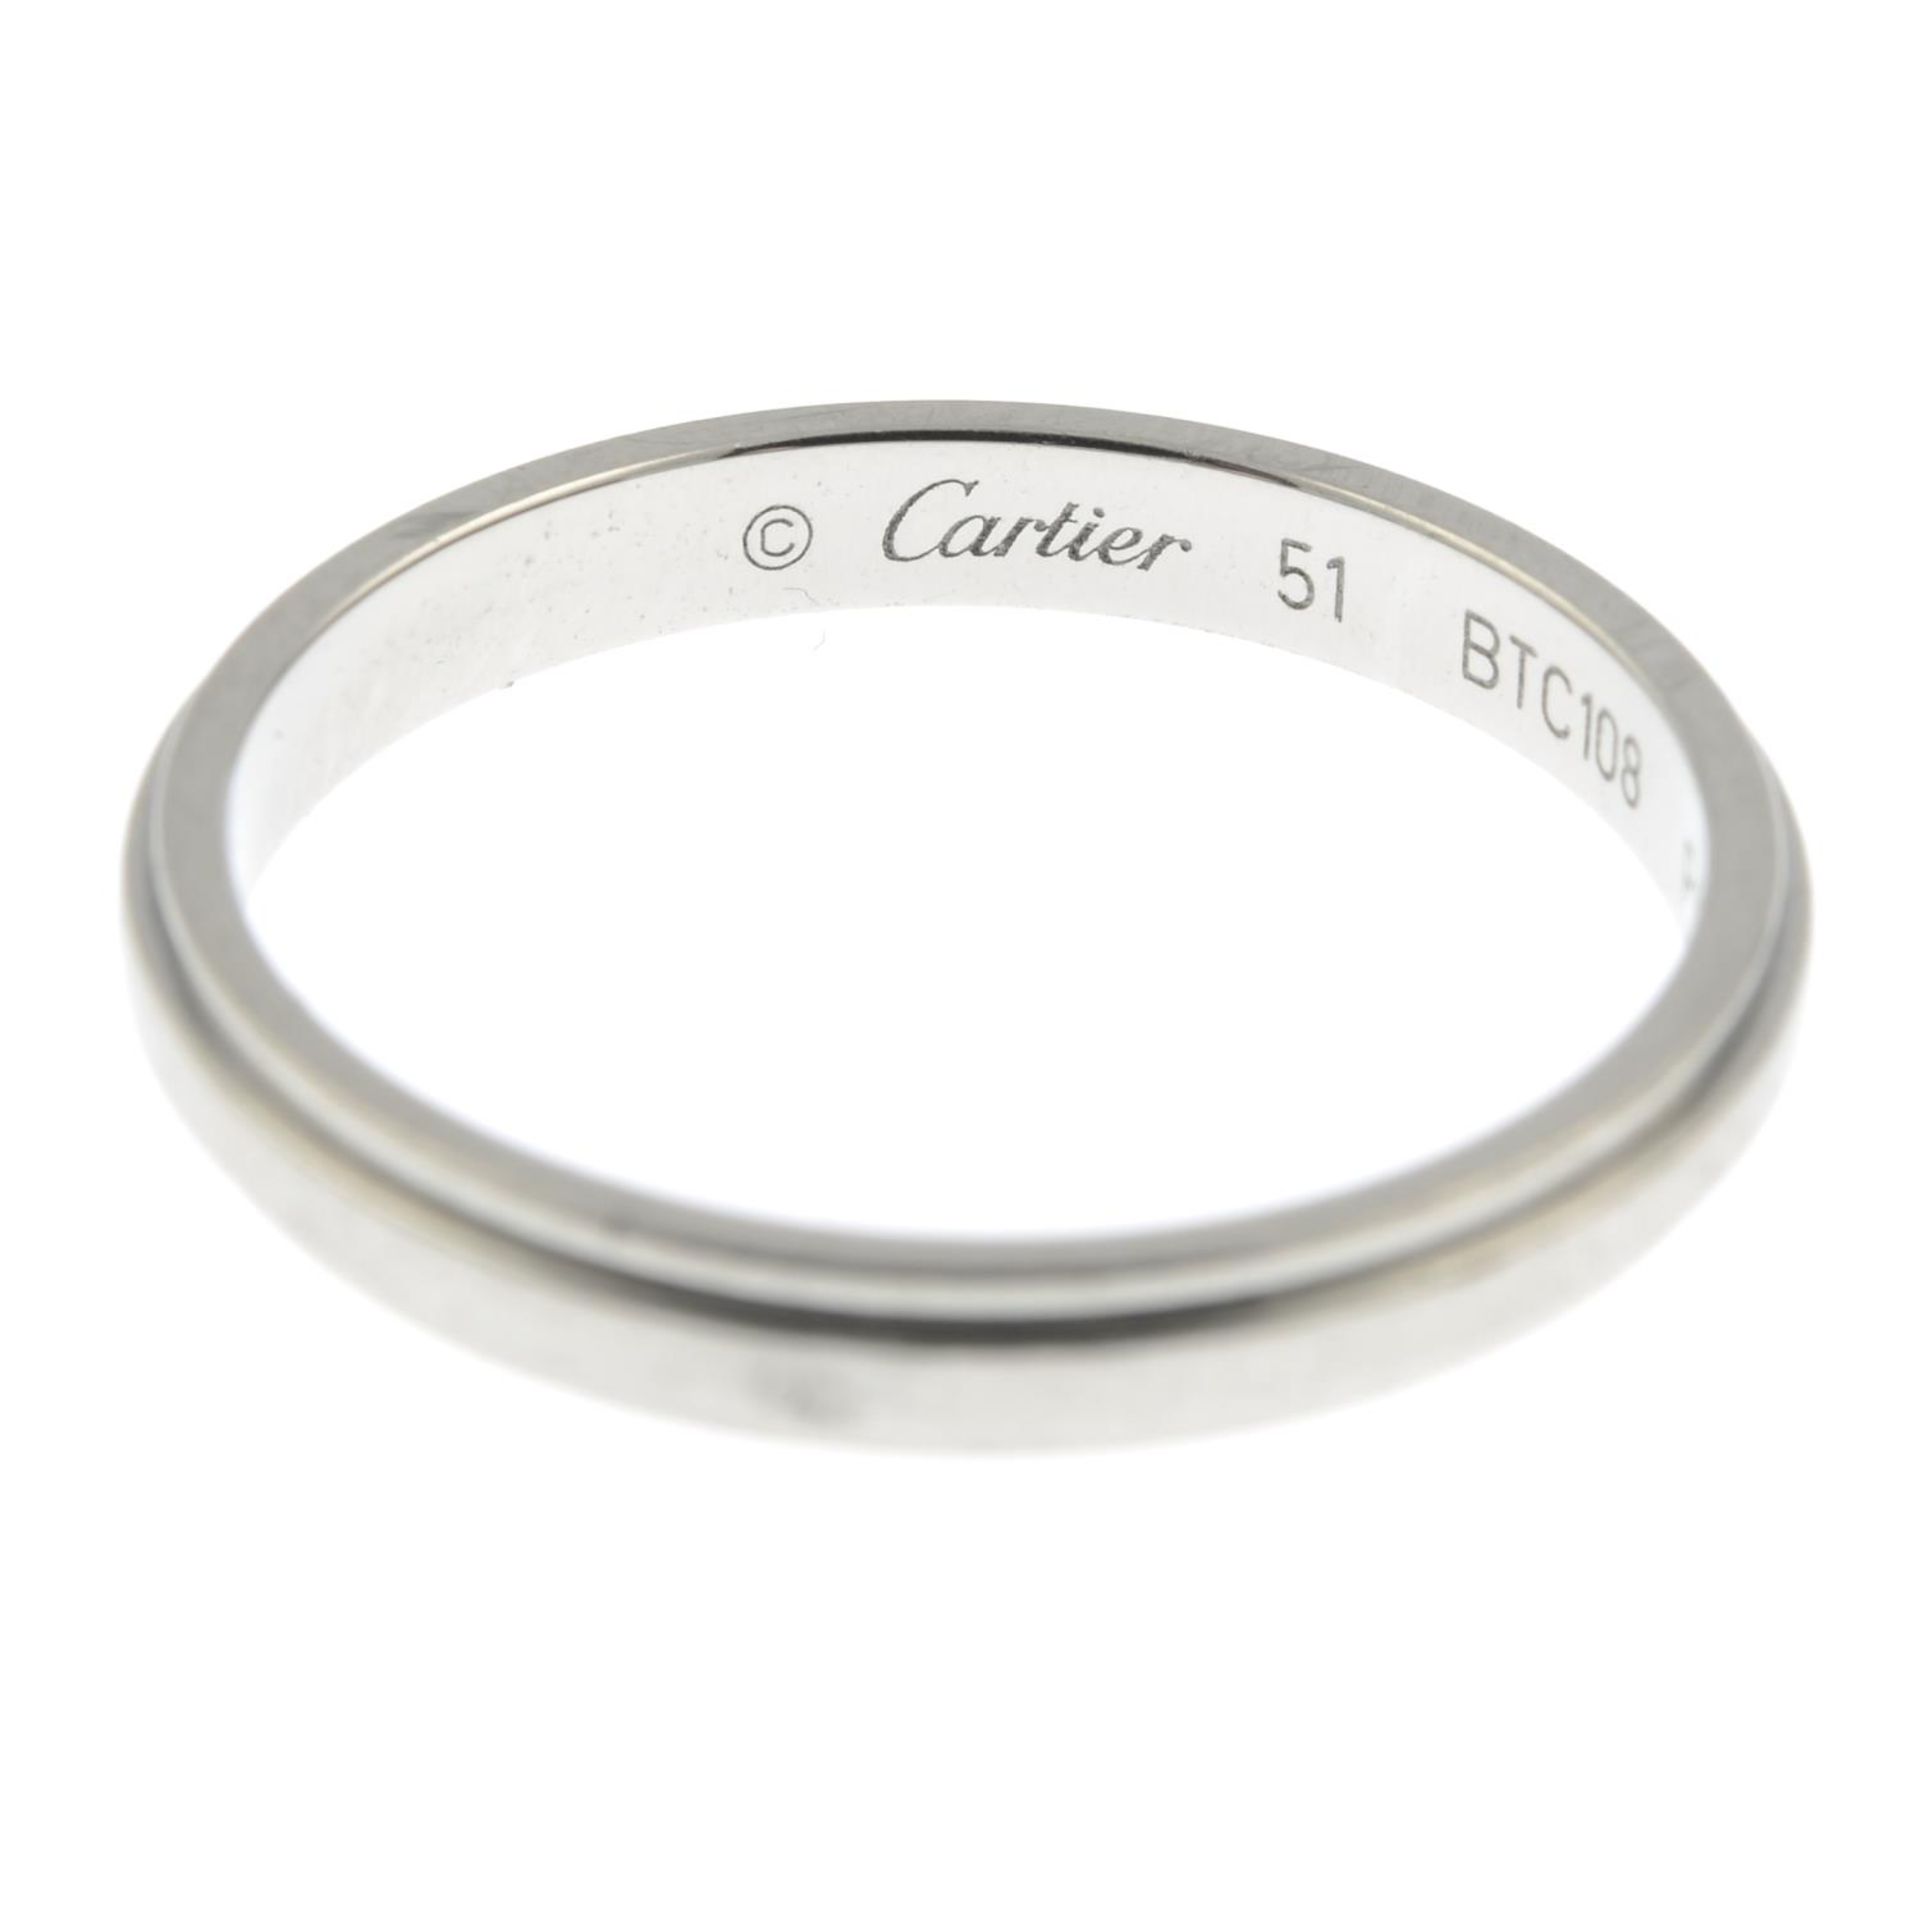 A band ring, by Cartier.Signed by Cartier. - Image 2 of 2